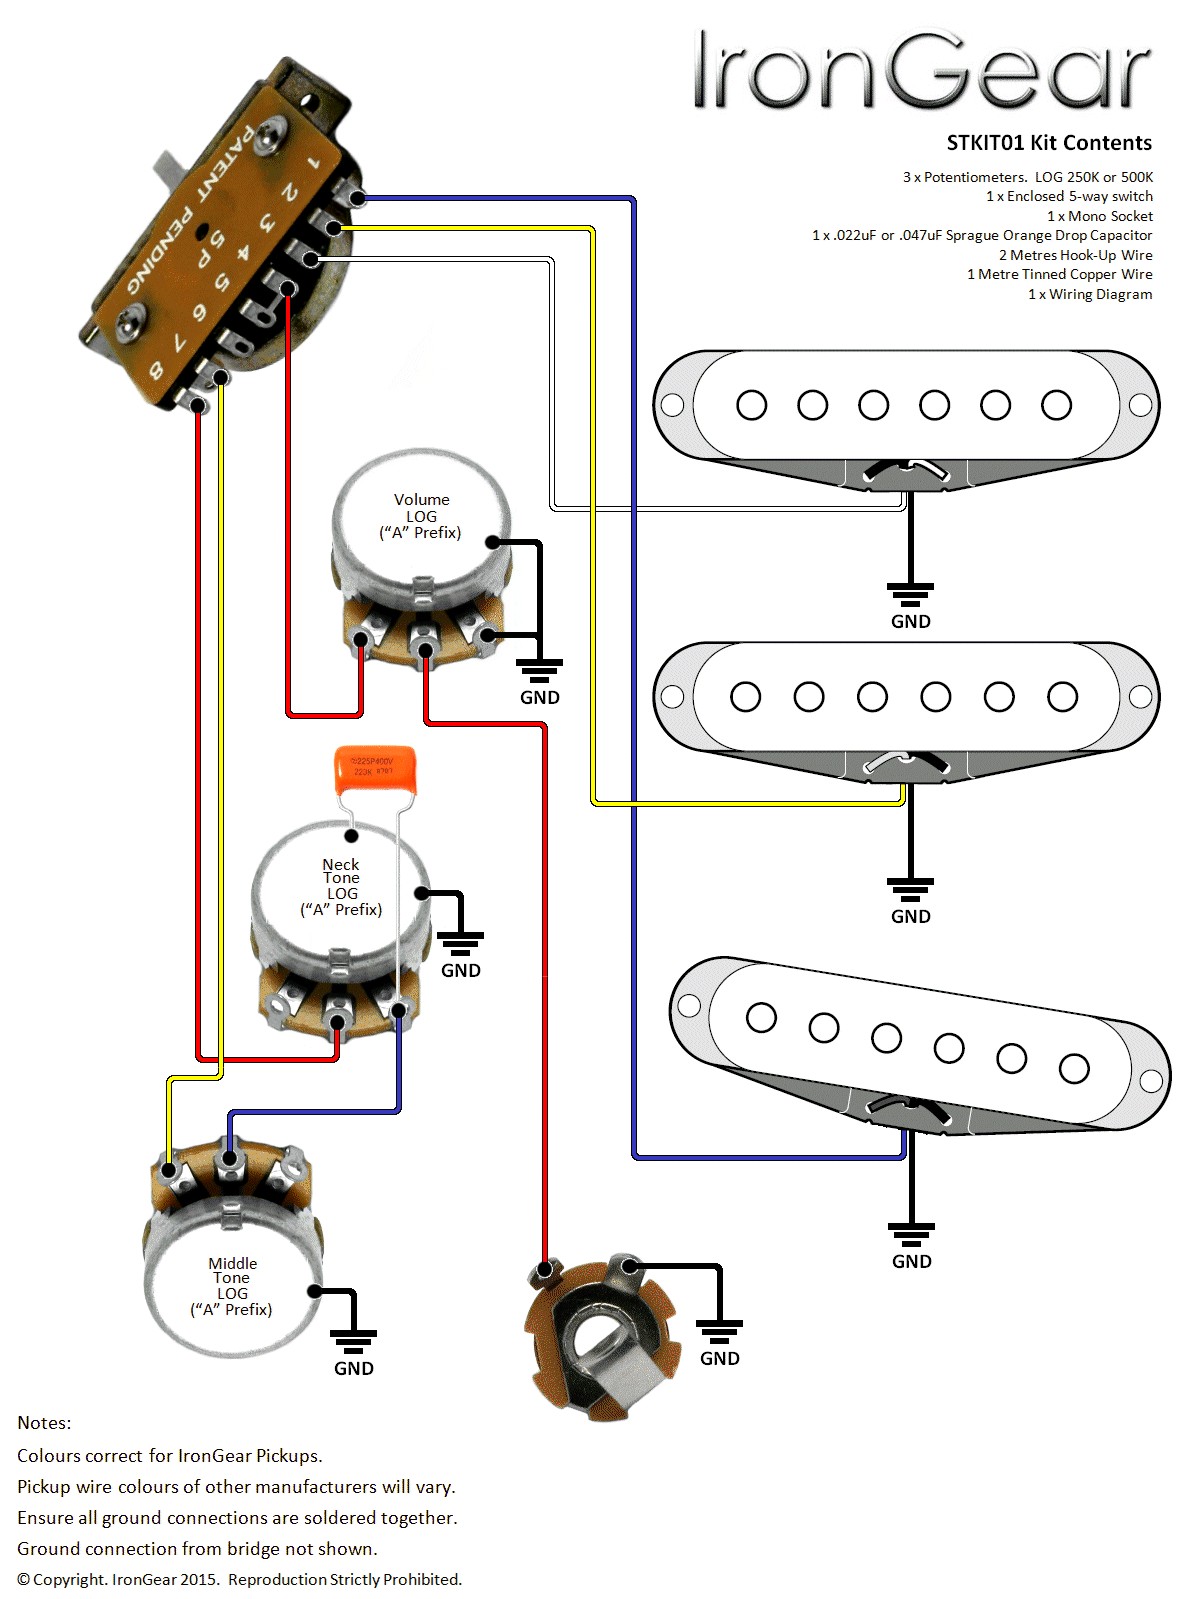 Guitar Wiring Kits By Axetec For Strat Fine Fender Stratocaster Wiring Diagram Strat Copy Strat Wiring Diagram